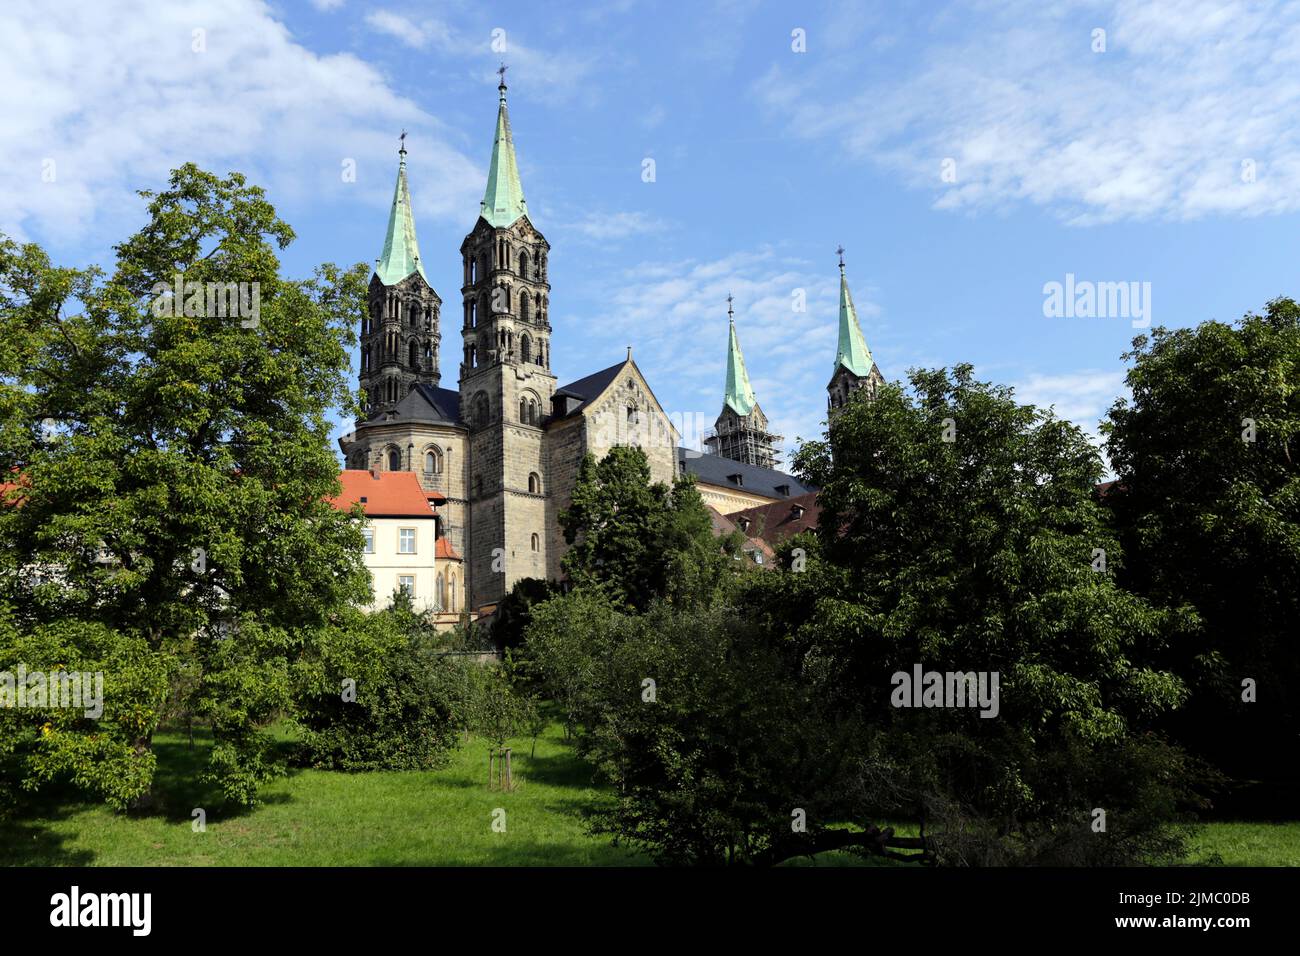 Cathedral of St Peter and St George of Bamberg, Germany Stock Photo